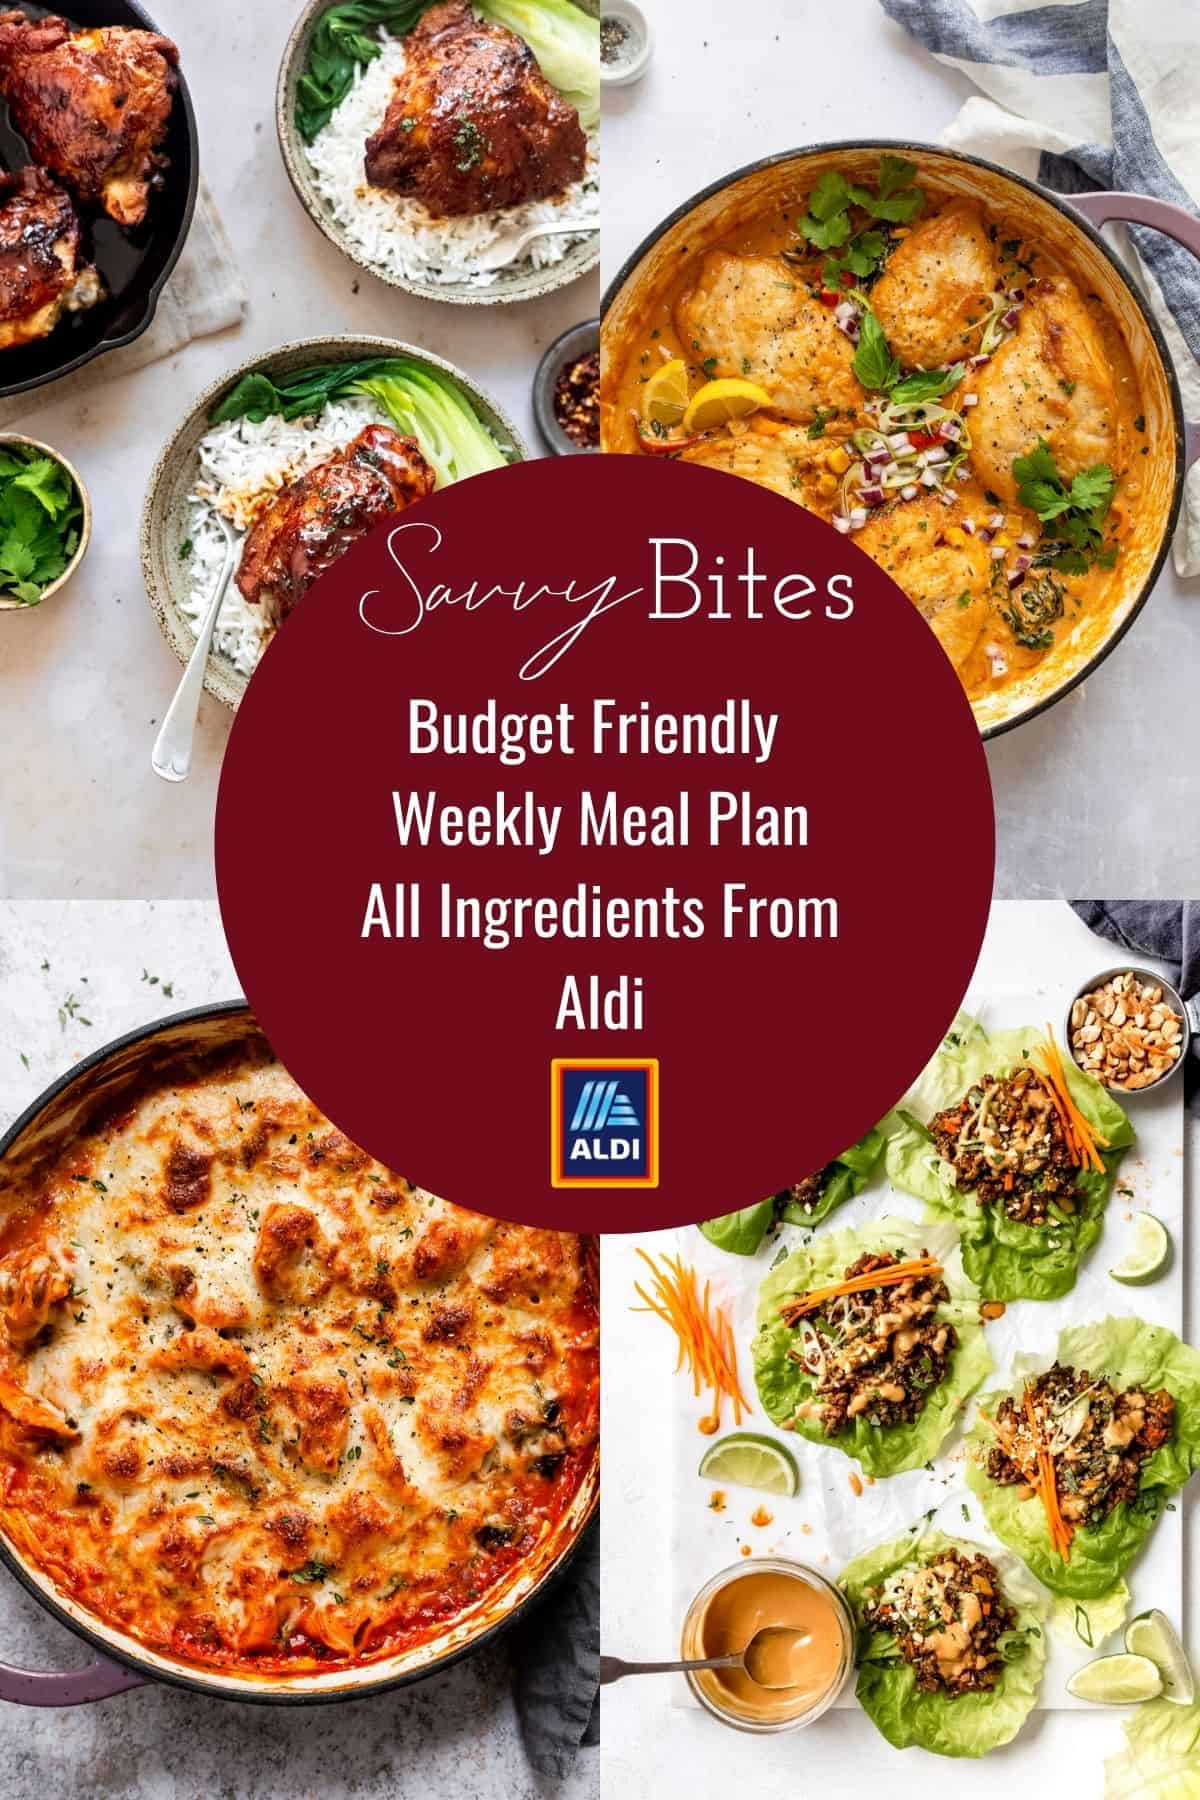 Collage of recipe photos for the Aldi meal plan